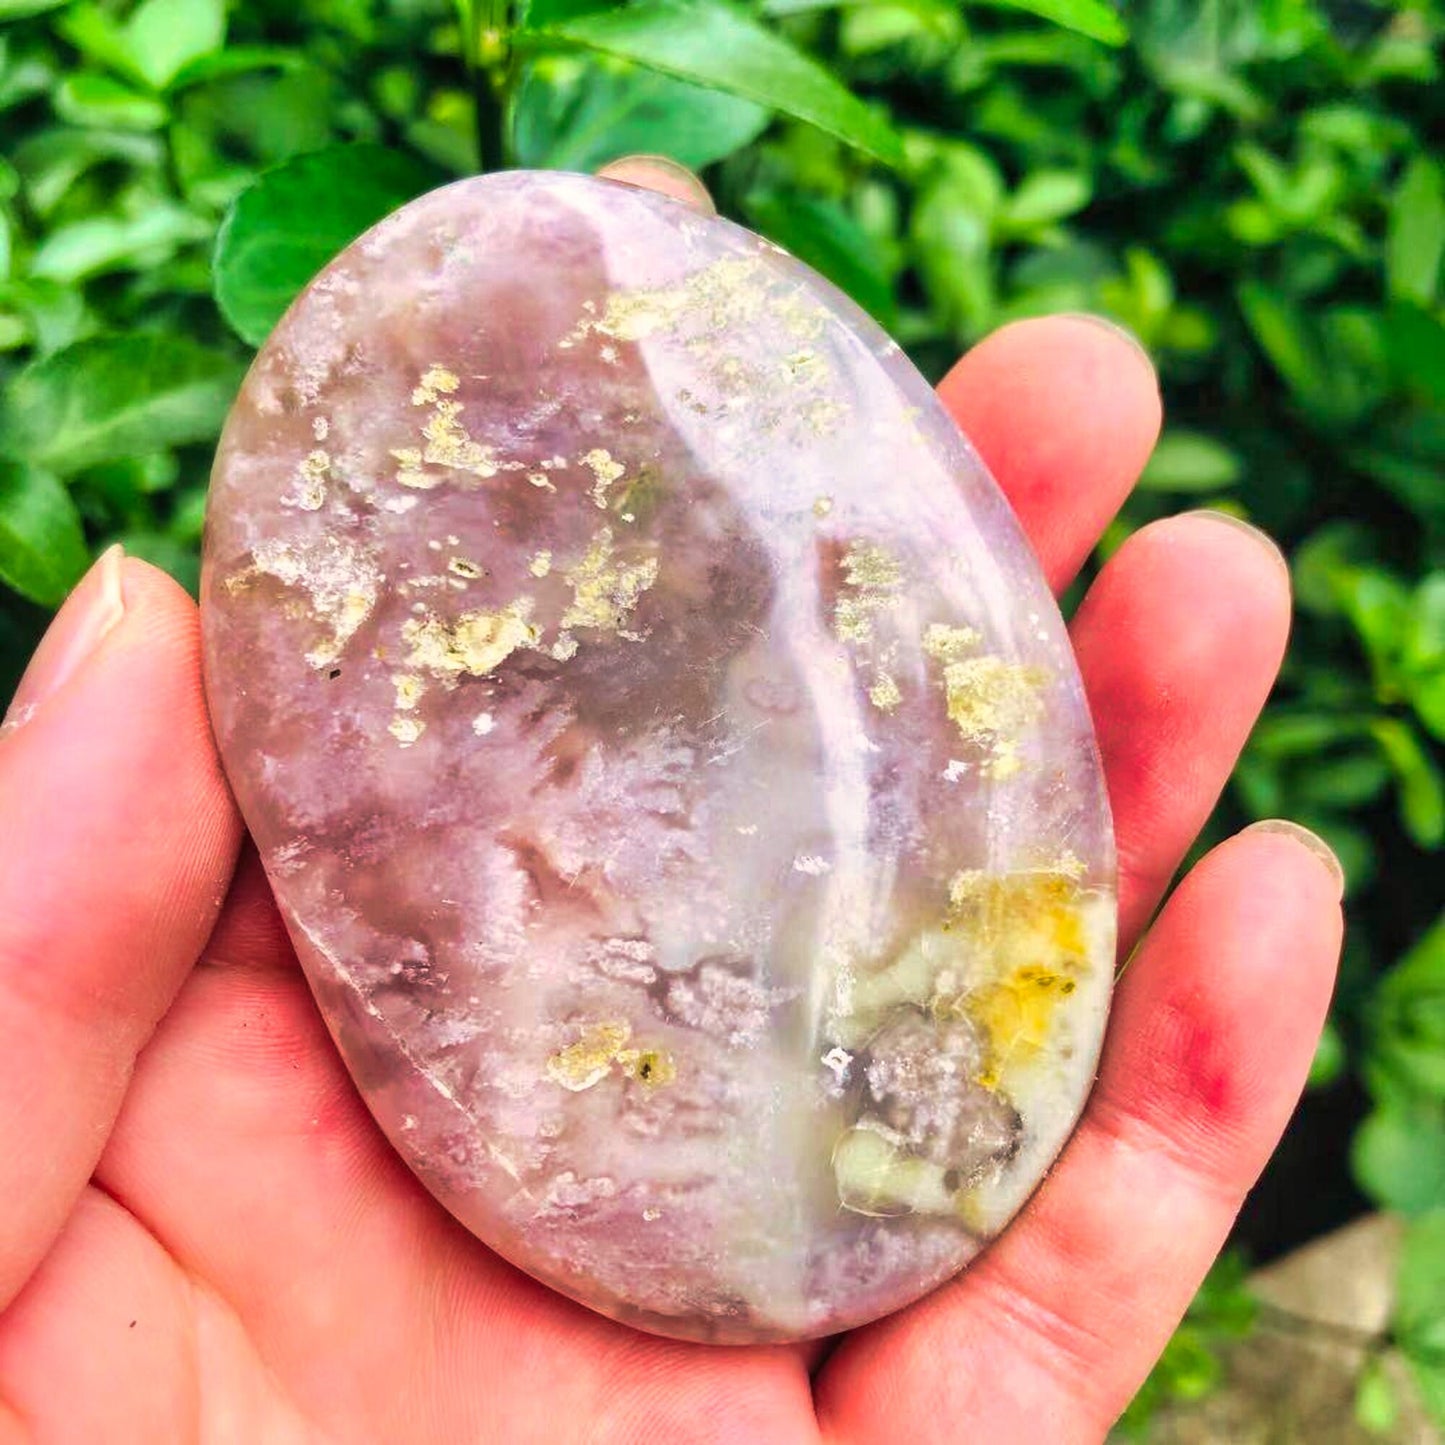 Natural Polished Crystal Cherry Blossom Flower Agate Palm Stone for Healing Gifts - 35g-260g (1pc)